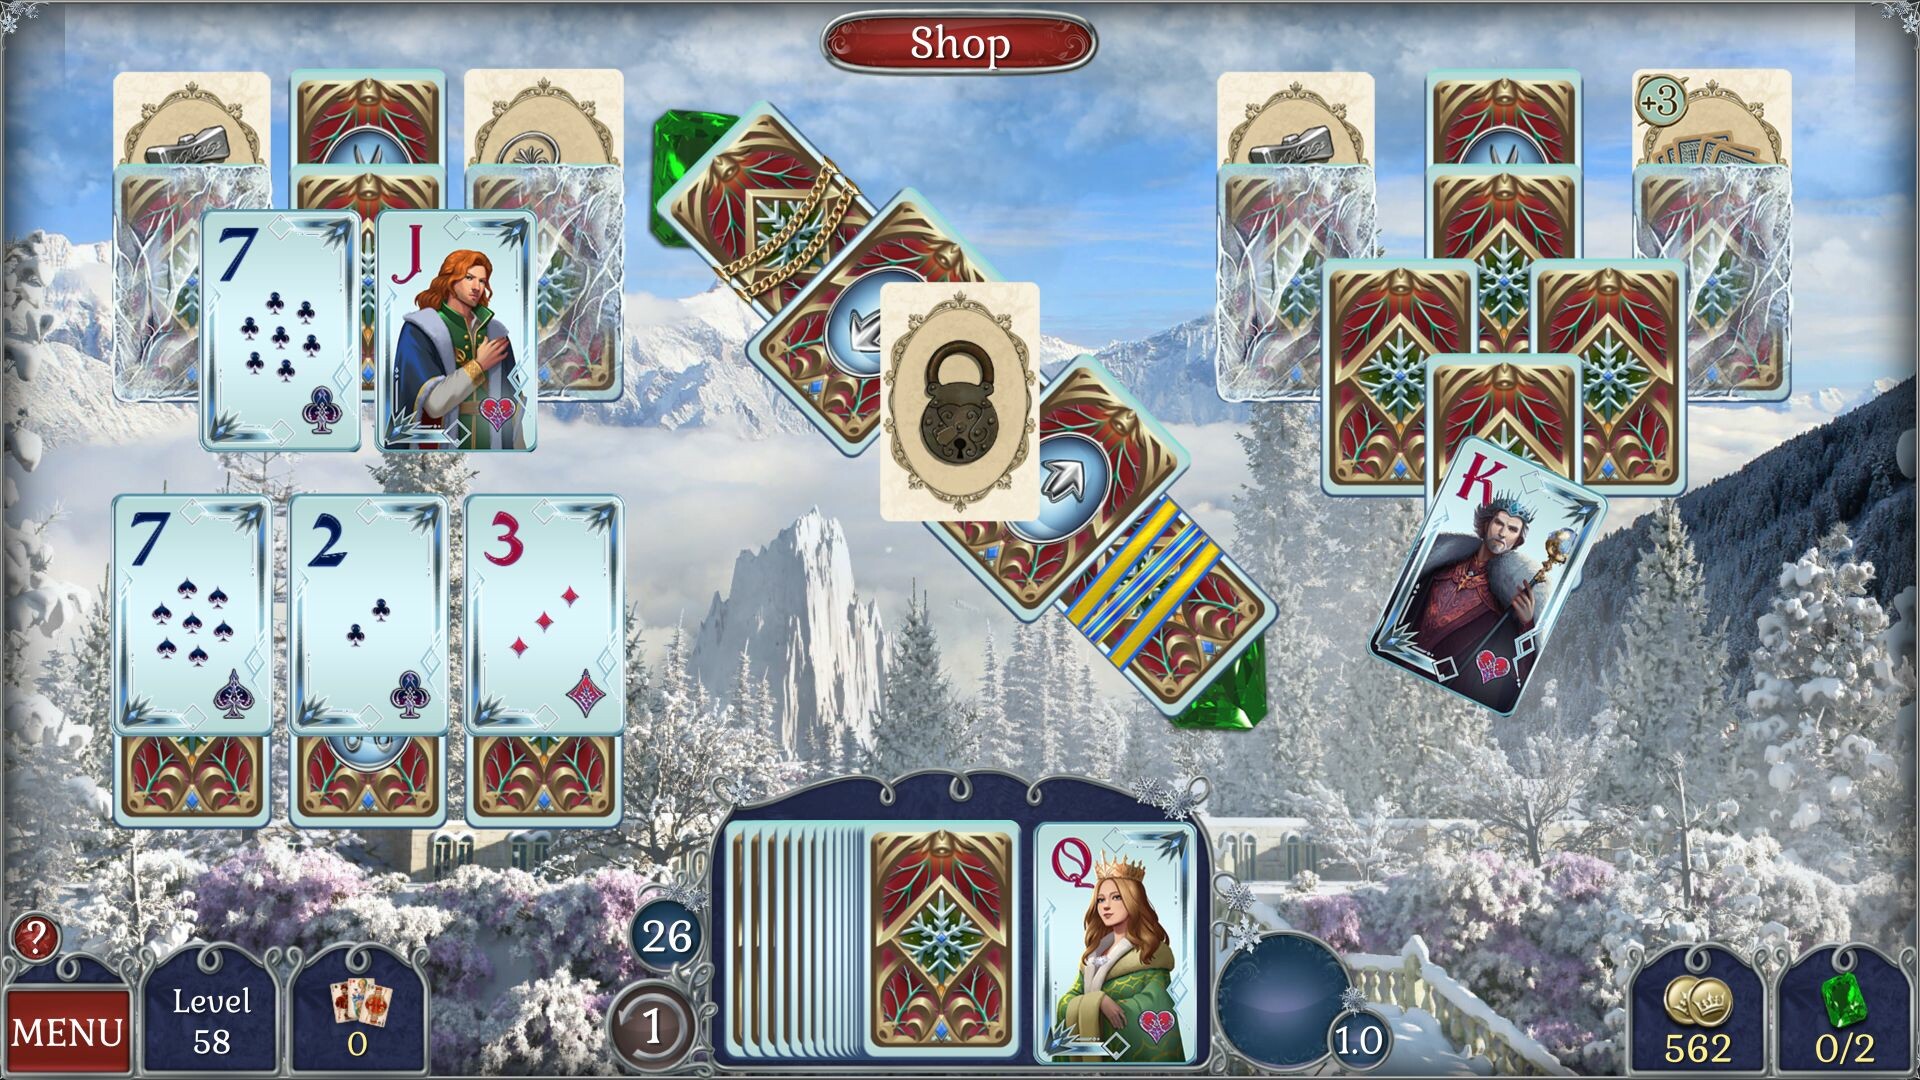 [$ 5.63] Jewel Match Solitaire Winterscapes 2 Collector's Edition Steam CD Key